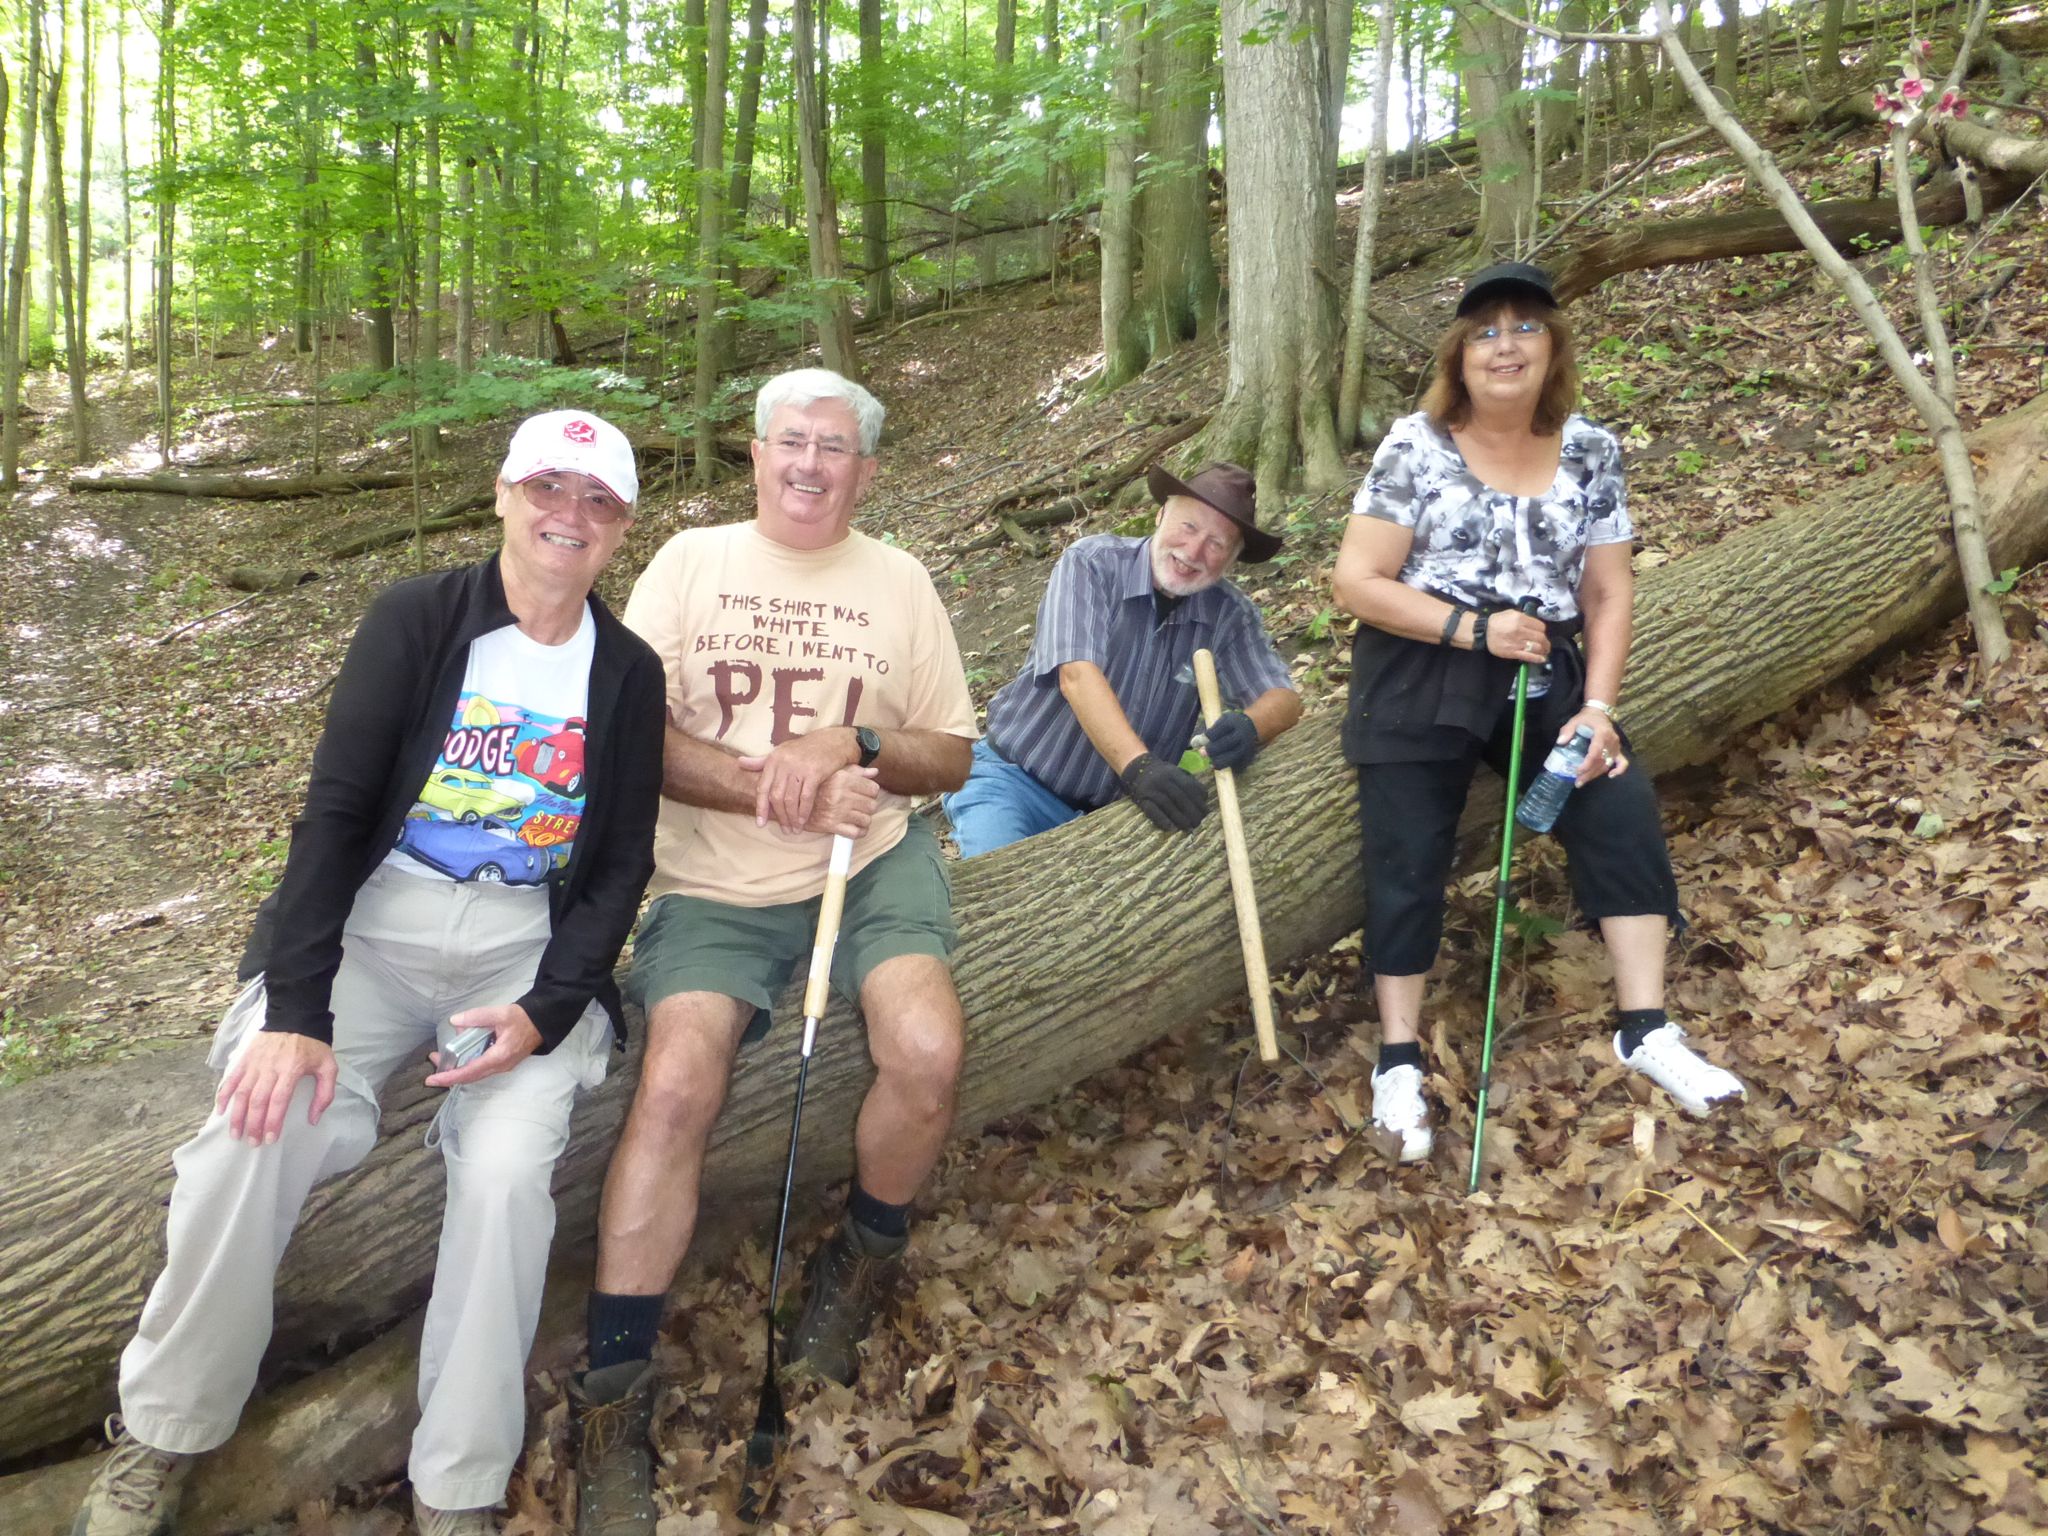 Group resting during Wednesday morning hike with bit of trail maintenance.